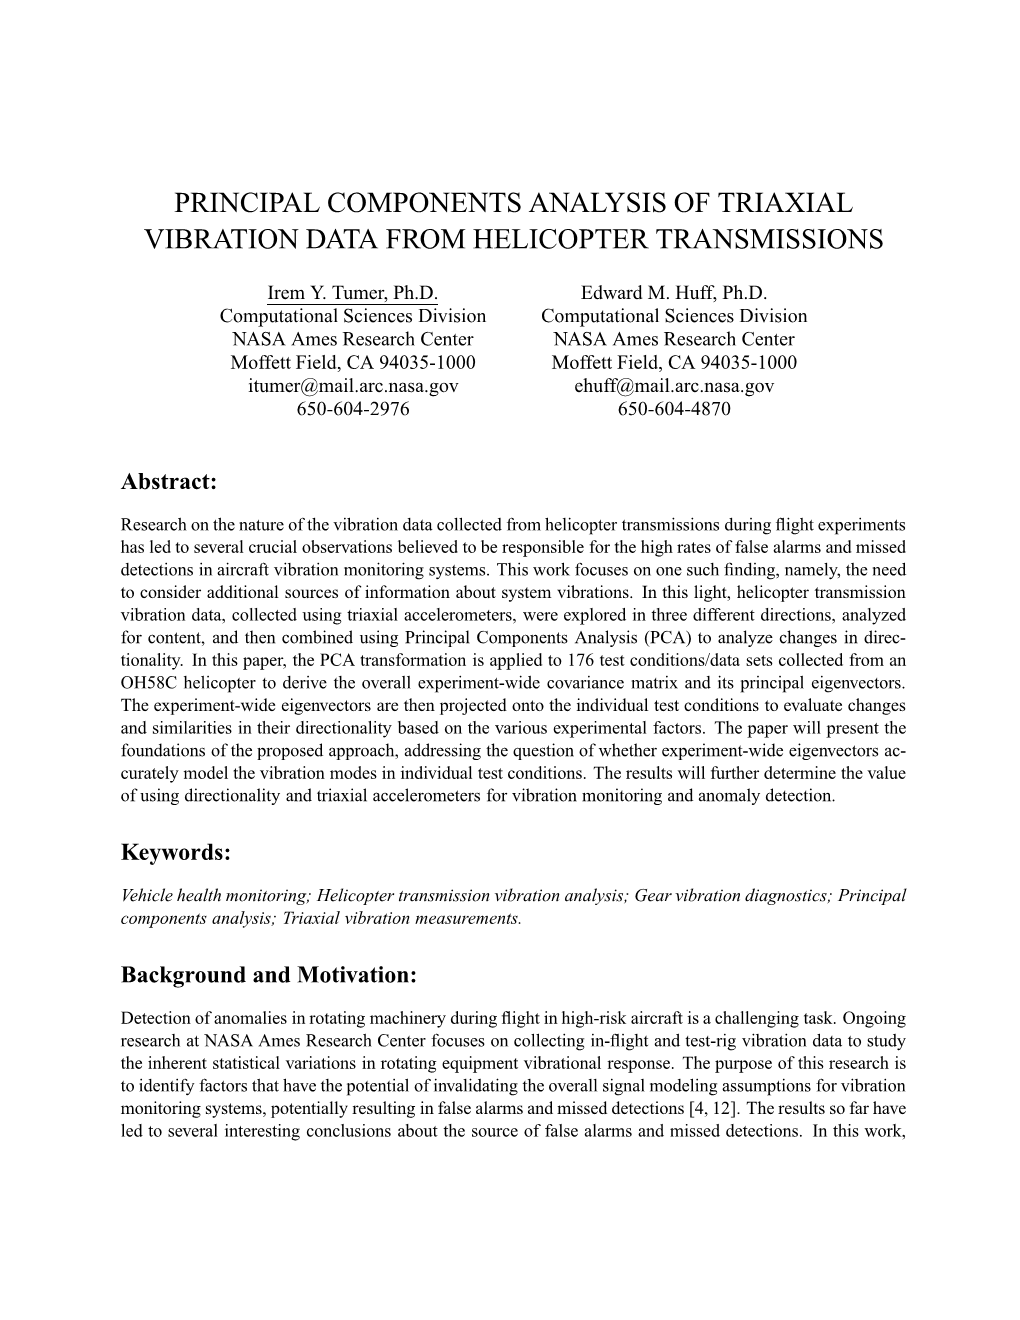 Principal Components Analysis of Triaxial Vibration Data from Helicopter Transmissions